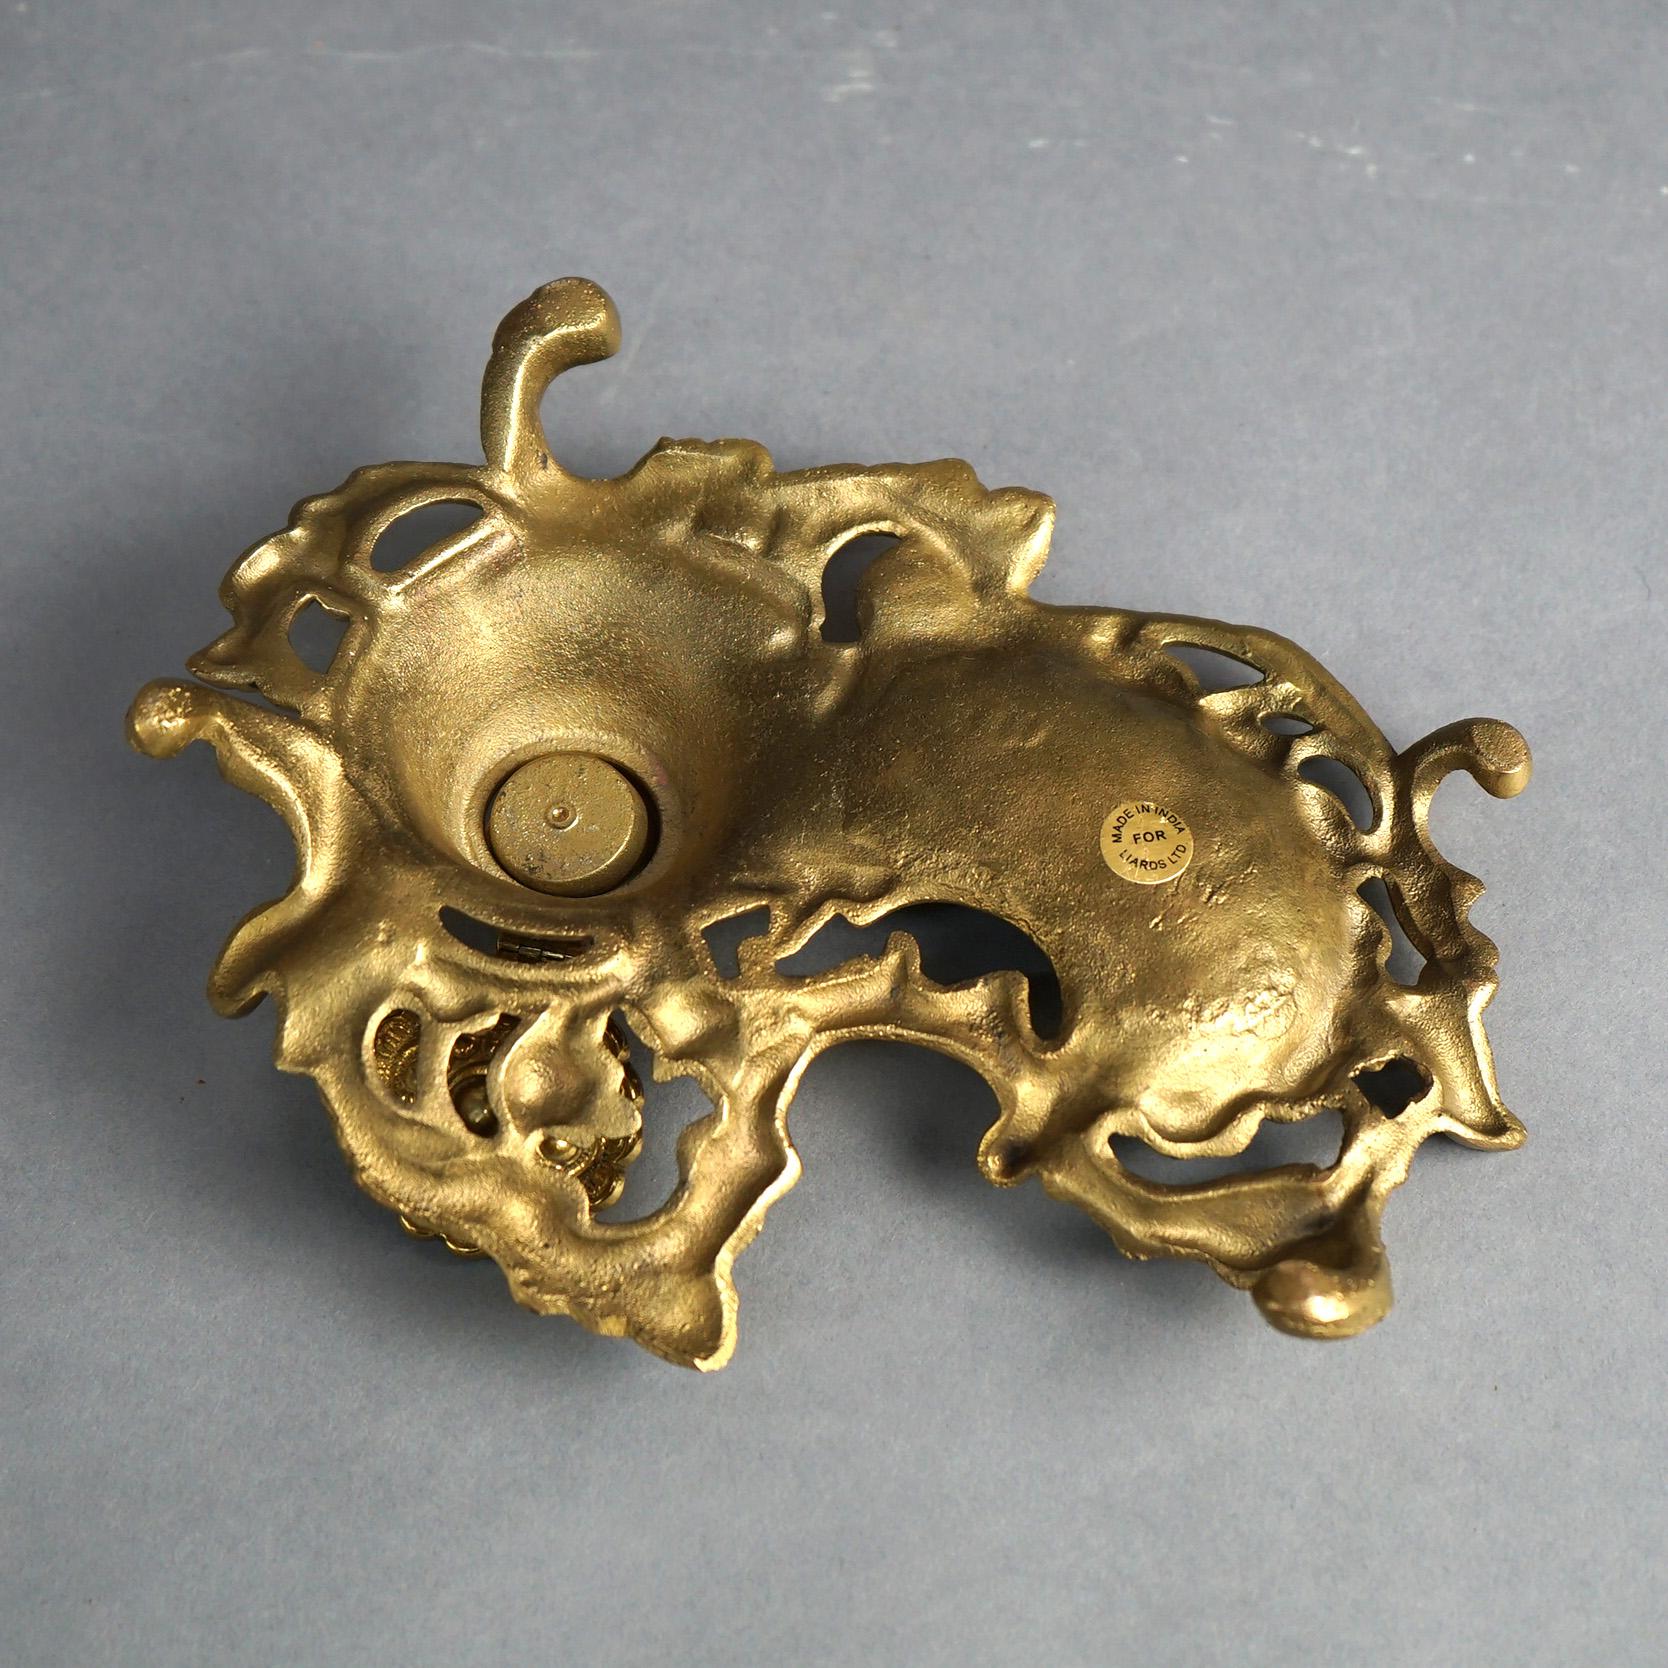 French Louis XIV Style Gilt Bronze Foliate Form Inkwell 20thC

Measures- 2.75''H x 7.5''W x 5.75''D